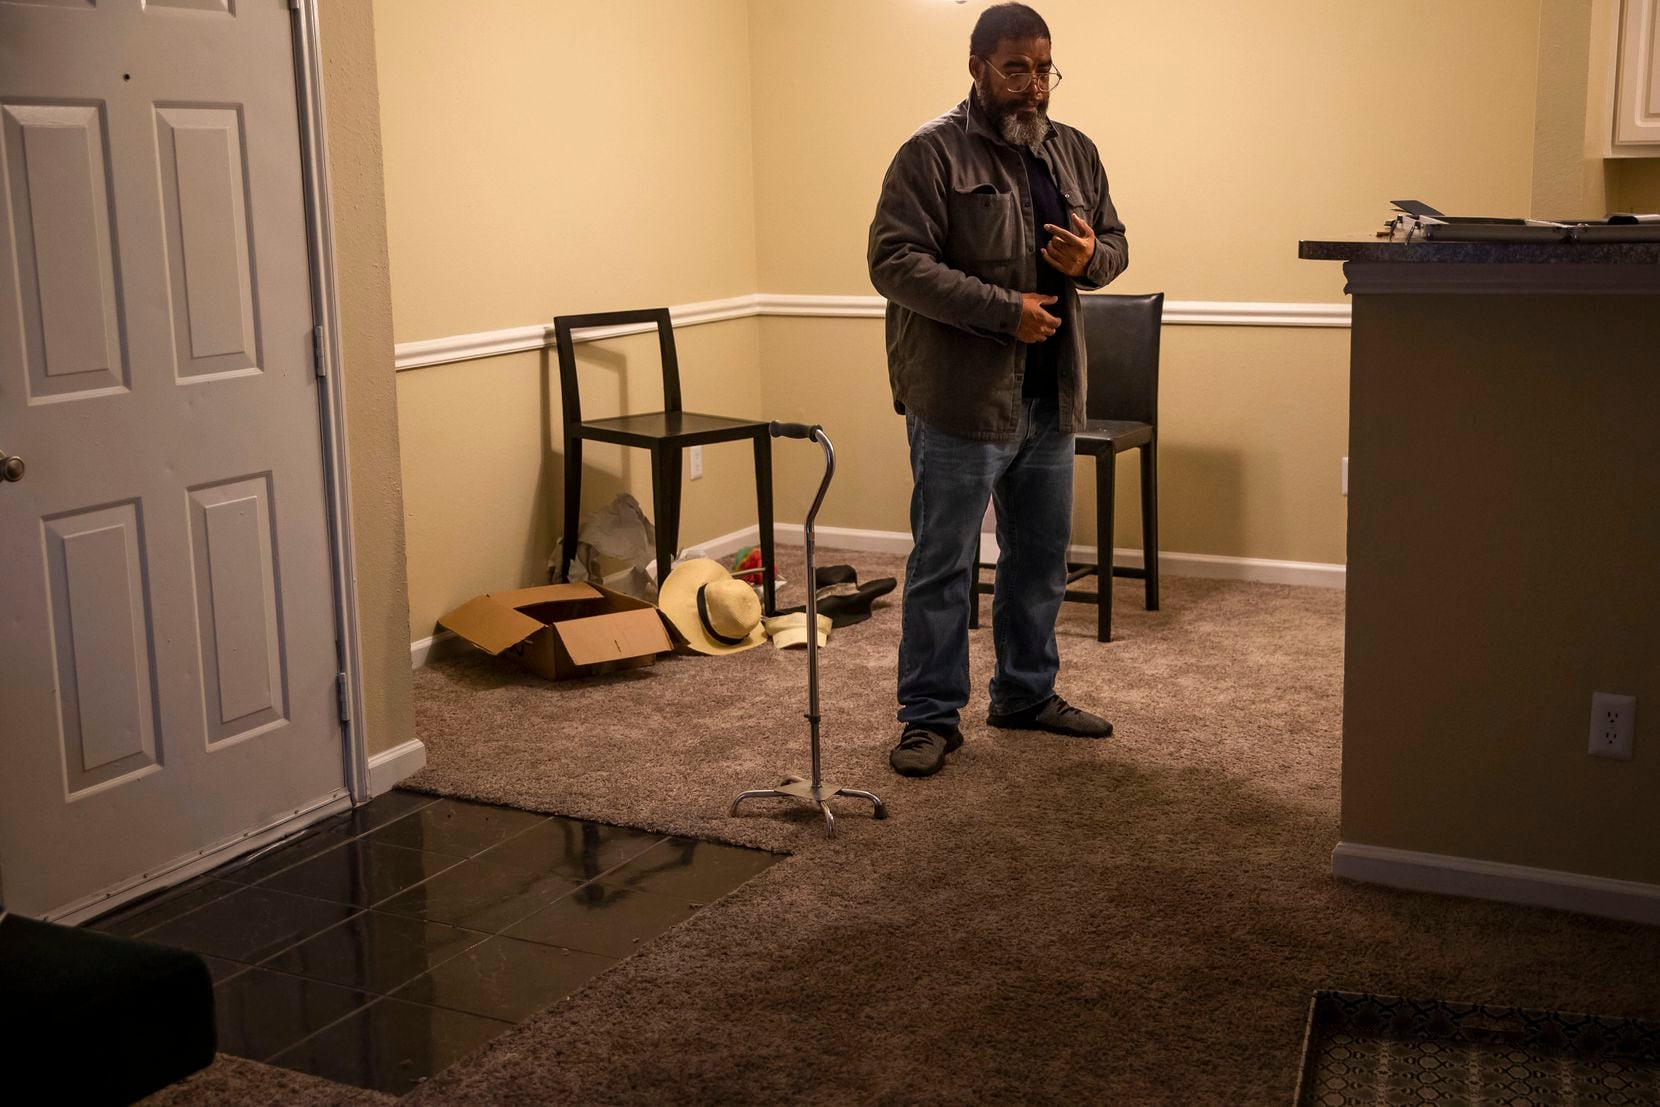 Randy Thornton looked around in dismay at his ransacked apartment in Cityplace on Jan. 23, 2020. The unit he'd worked so hard to find had been broken into and burglarized after he received donated furniture from S.O.U.L. Church and before he could move in all of his belongings.